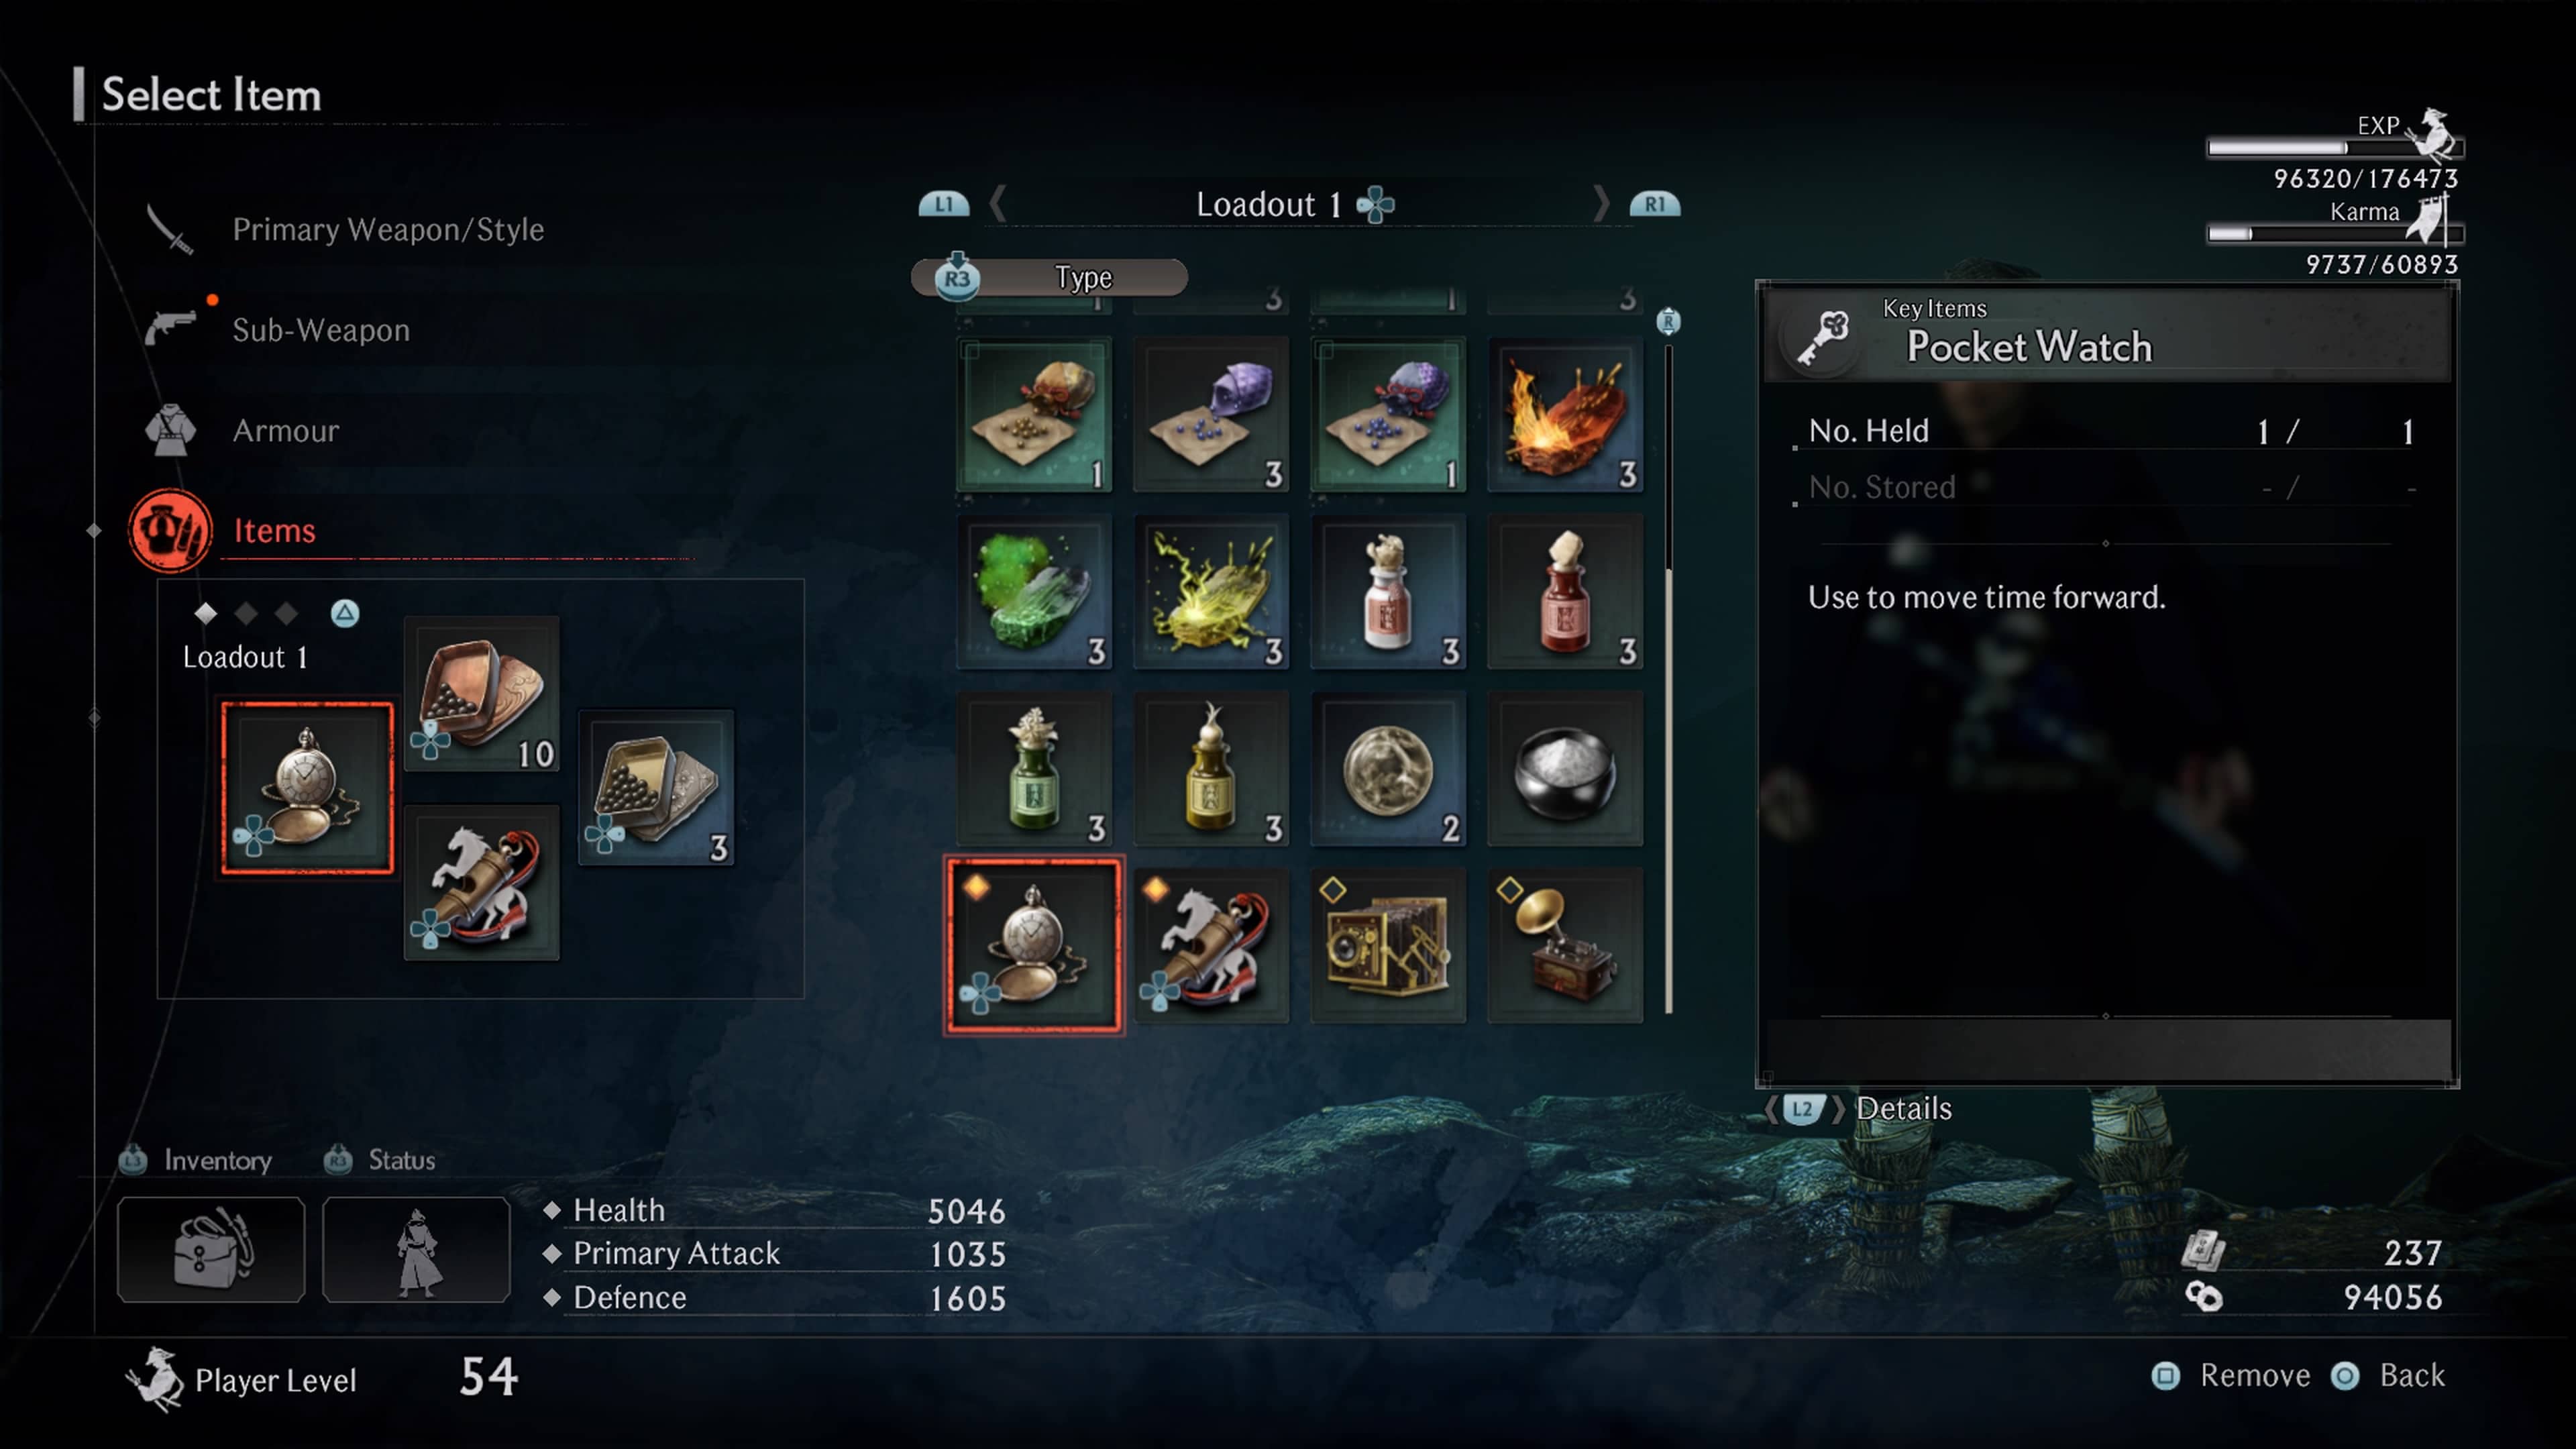 How to change time of day Rise of the Ronin: Image shows the Pocket Watch in your inventory